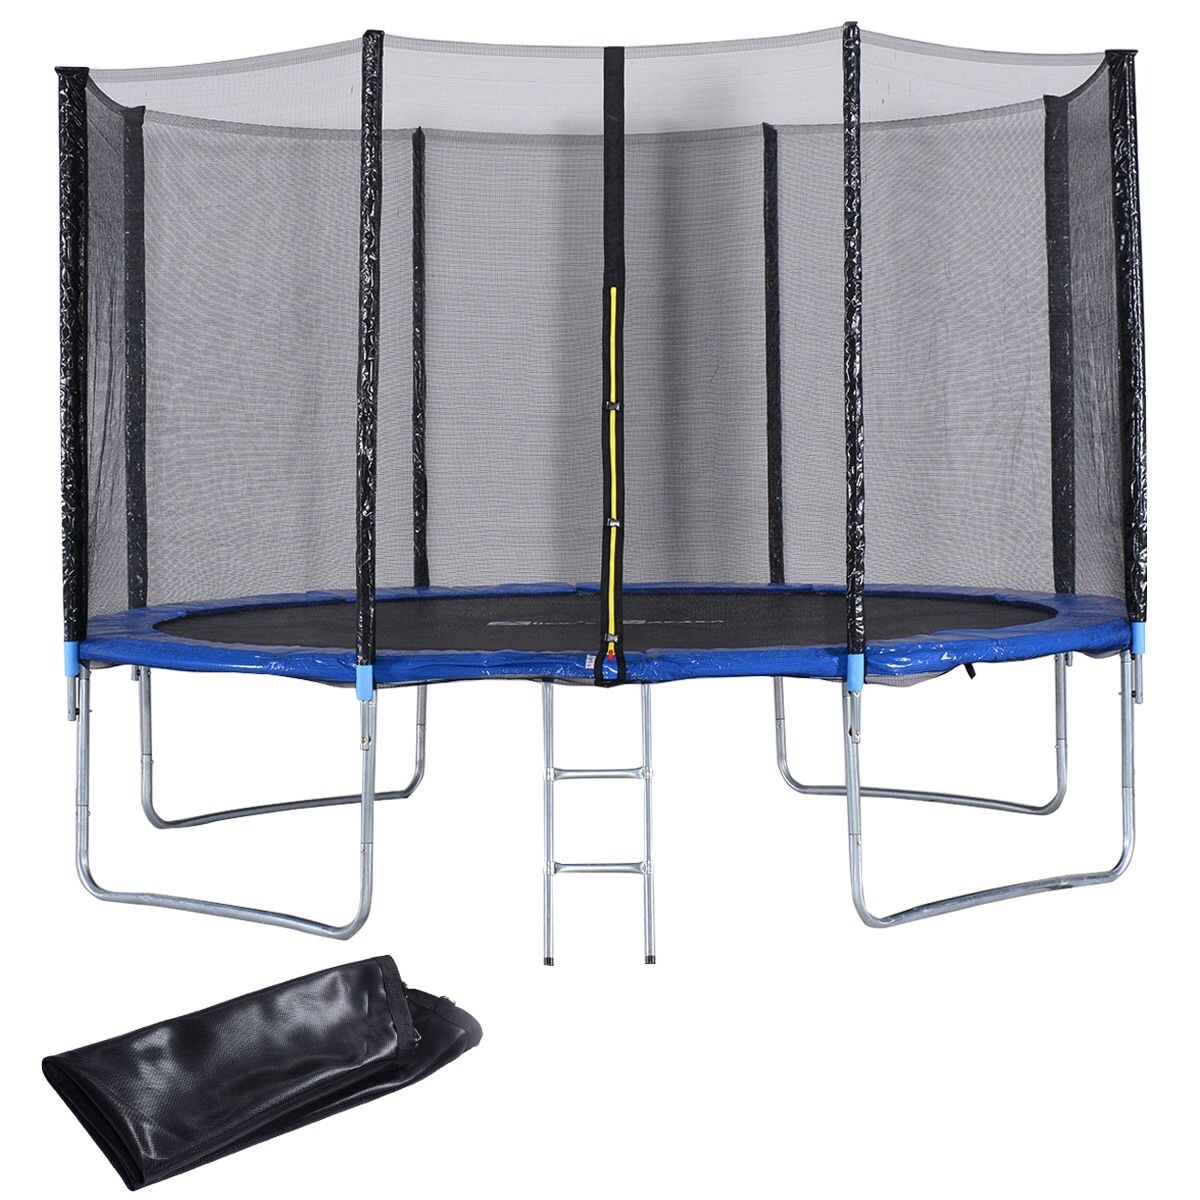 TRAMPOLINE REPLACEMENT PAD SAFETY NET RAIN COVER LADDER PADDING 6 8 10 12 14 FT 